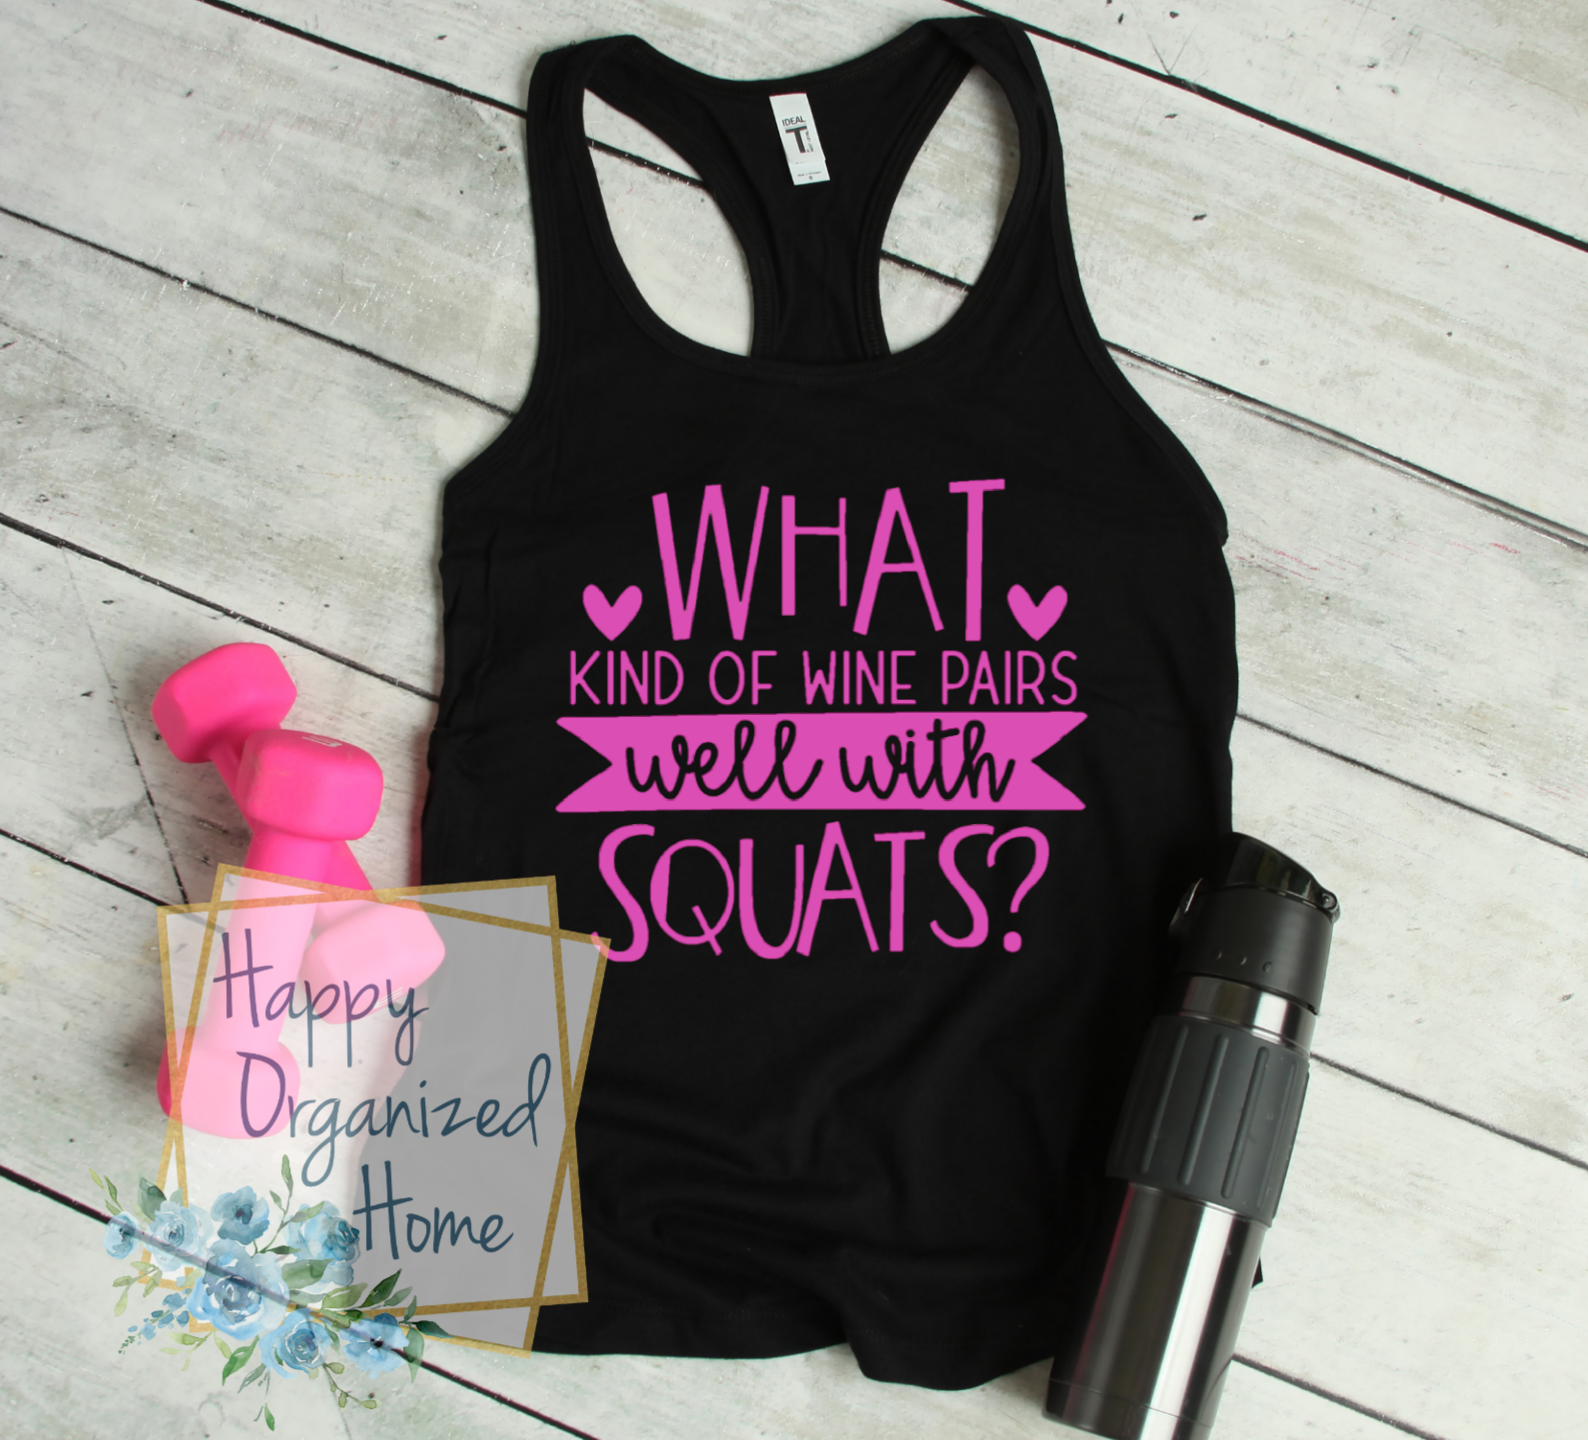 What kind of wine pairs well with Squats - Ladies Fitness Exercise tank